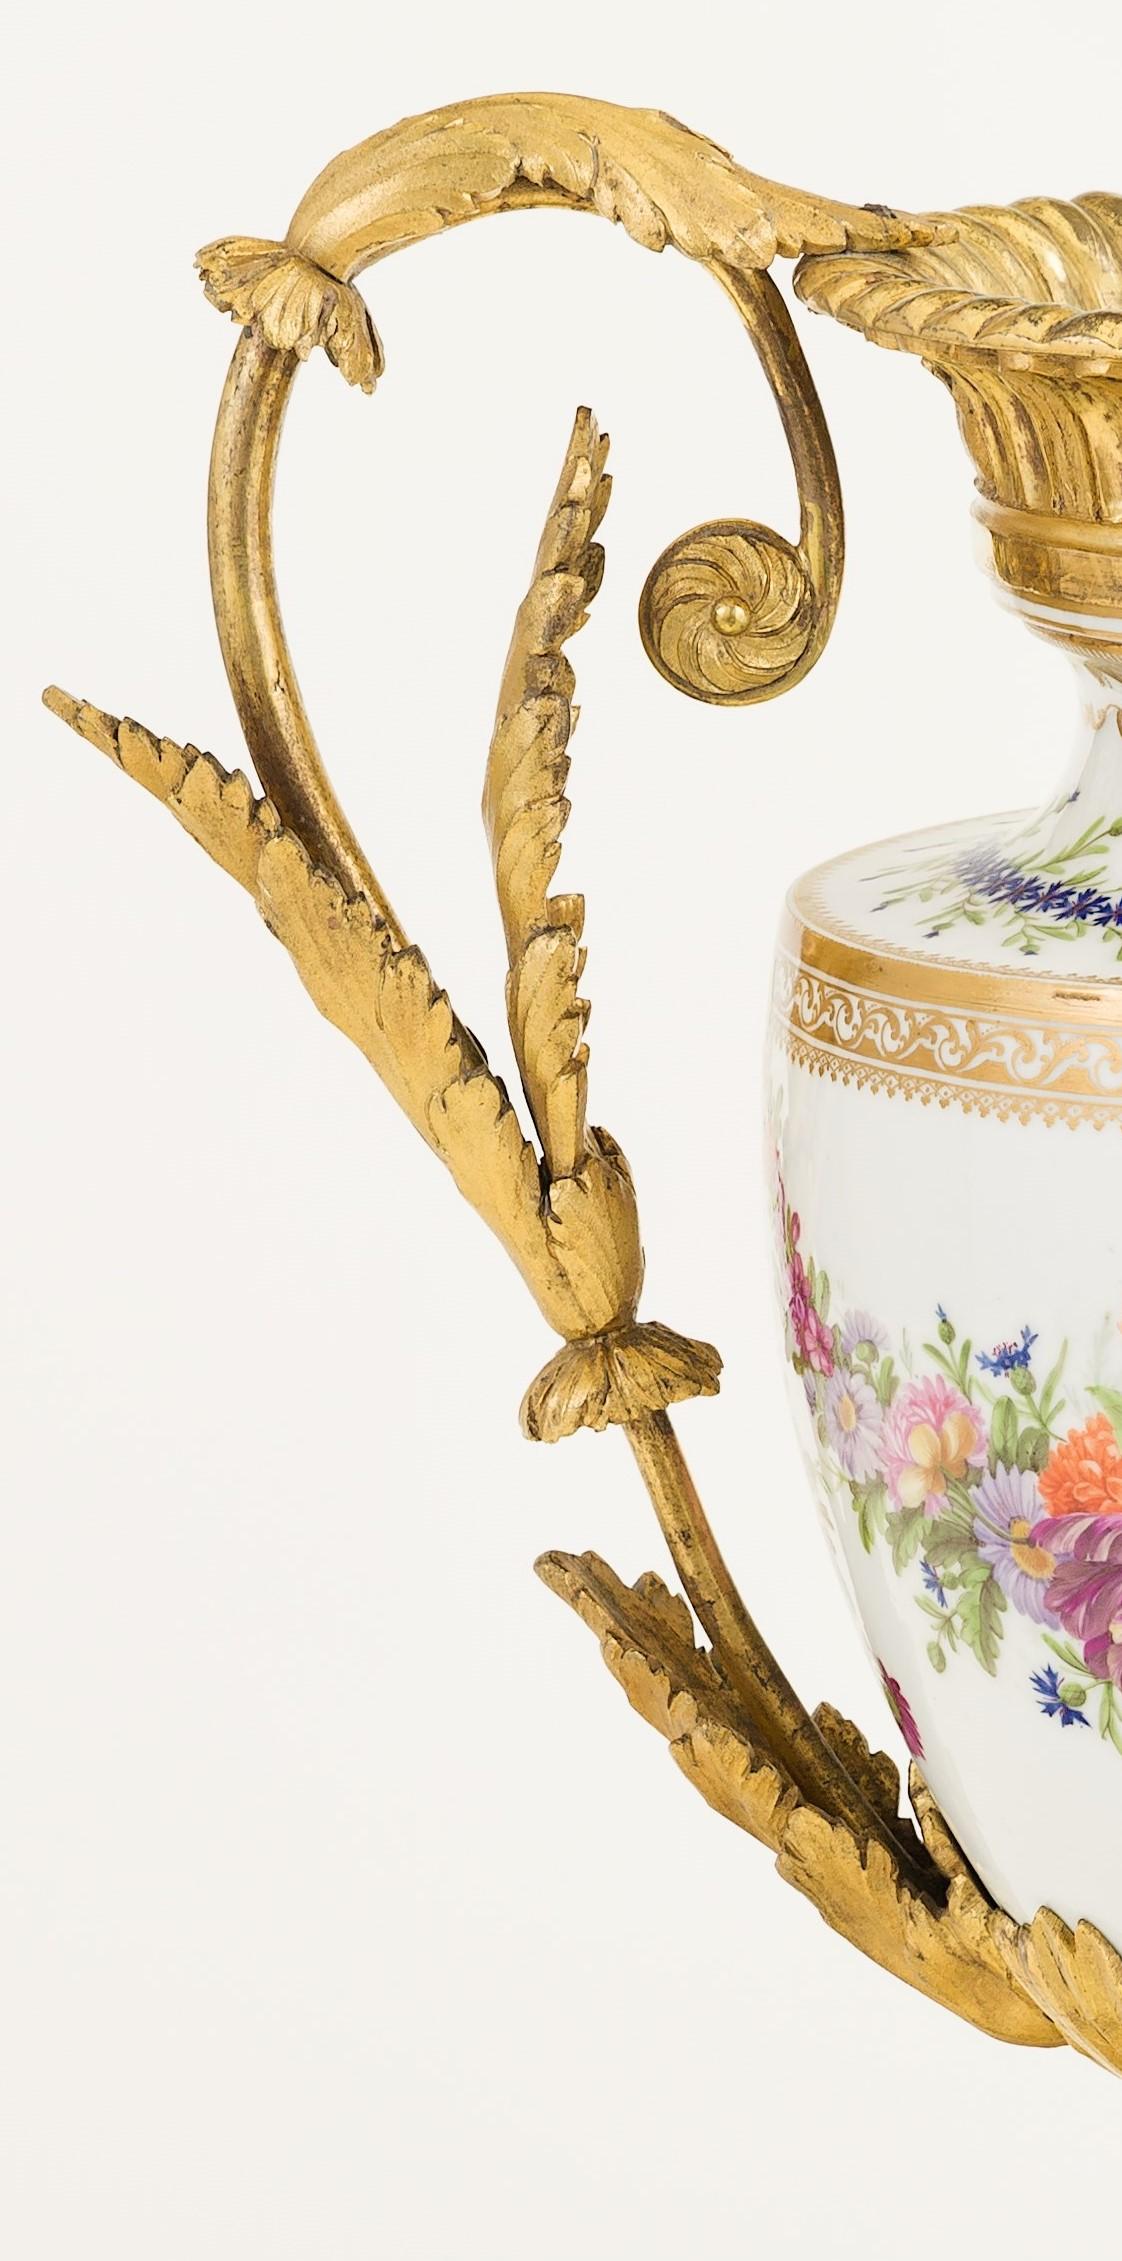 Transitional period, late 18th century (circa 1770-1780)
This vase embodies a neoclassical shape and a Rococo depiction of flowers, the blue flowers around the neck of the vase first appeared circa 1770s and became popular during the neoclassical